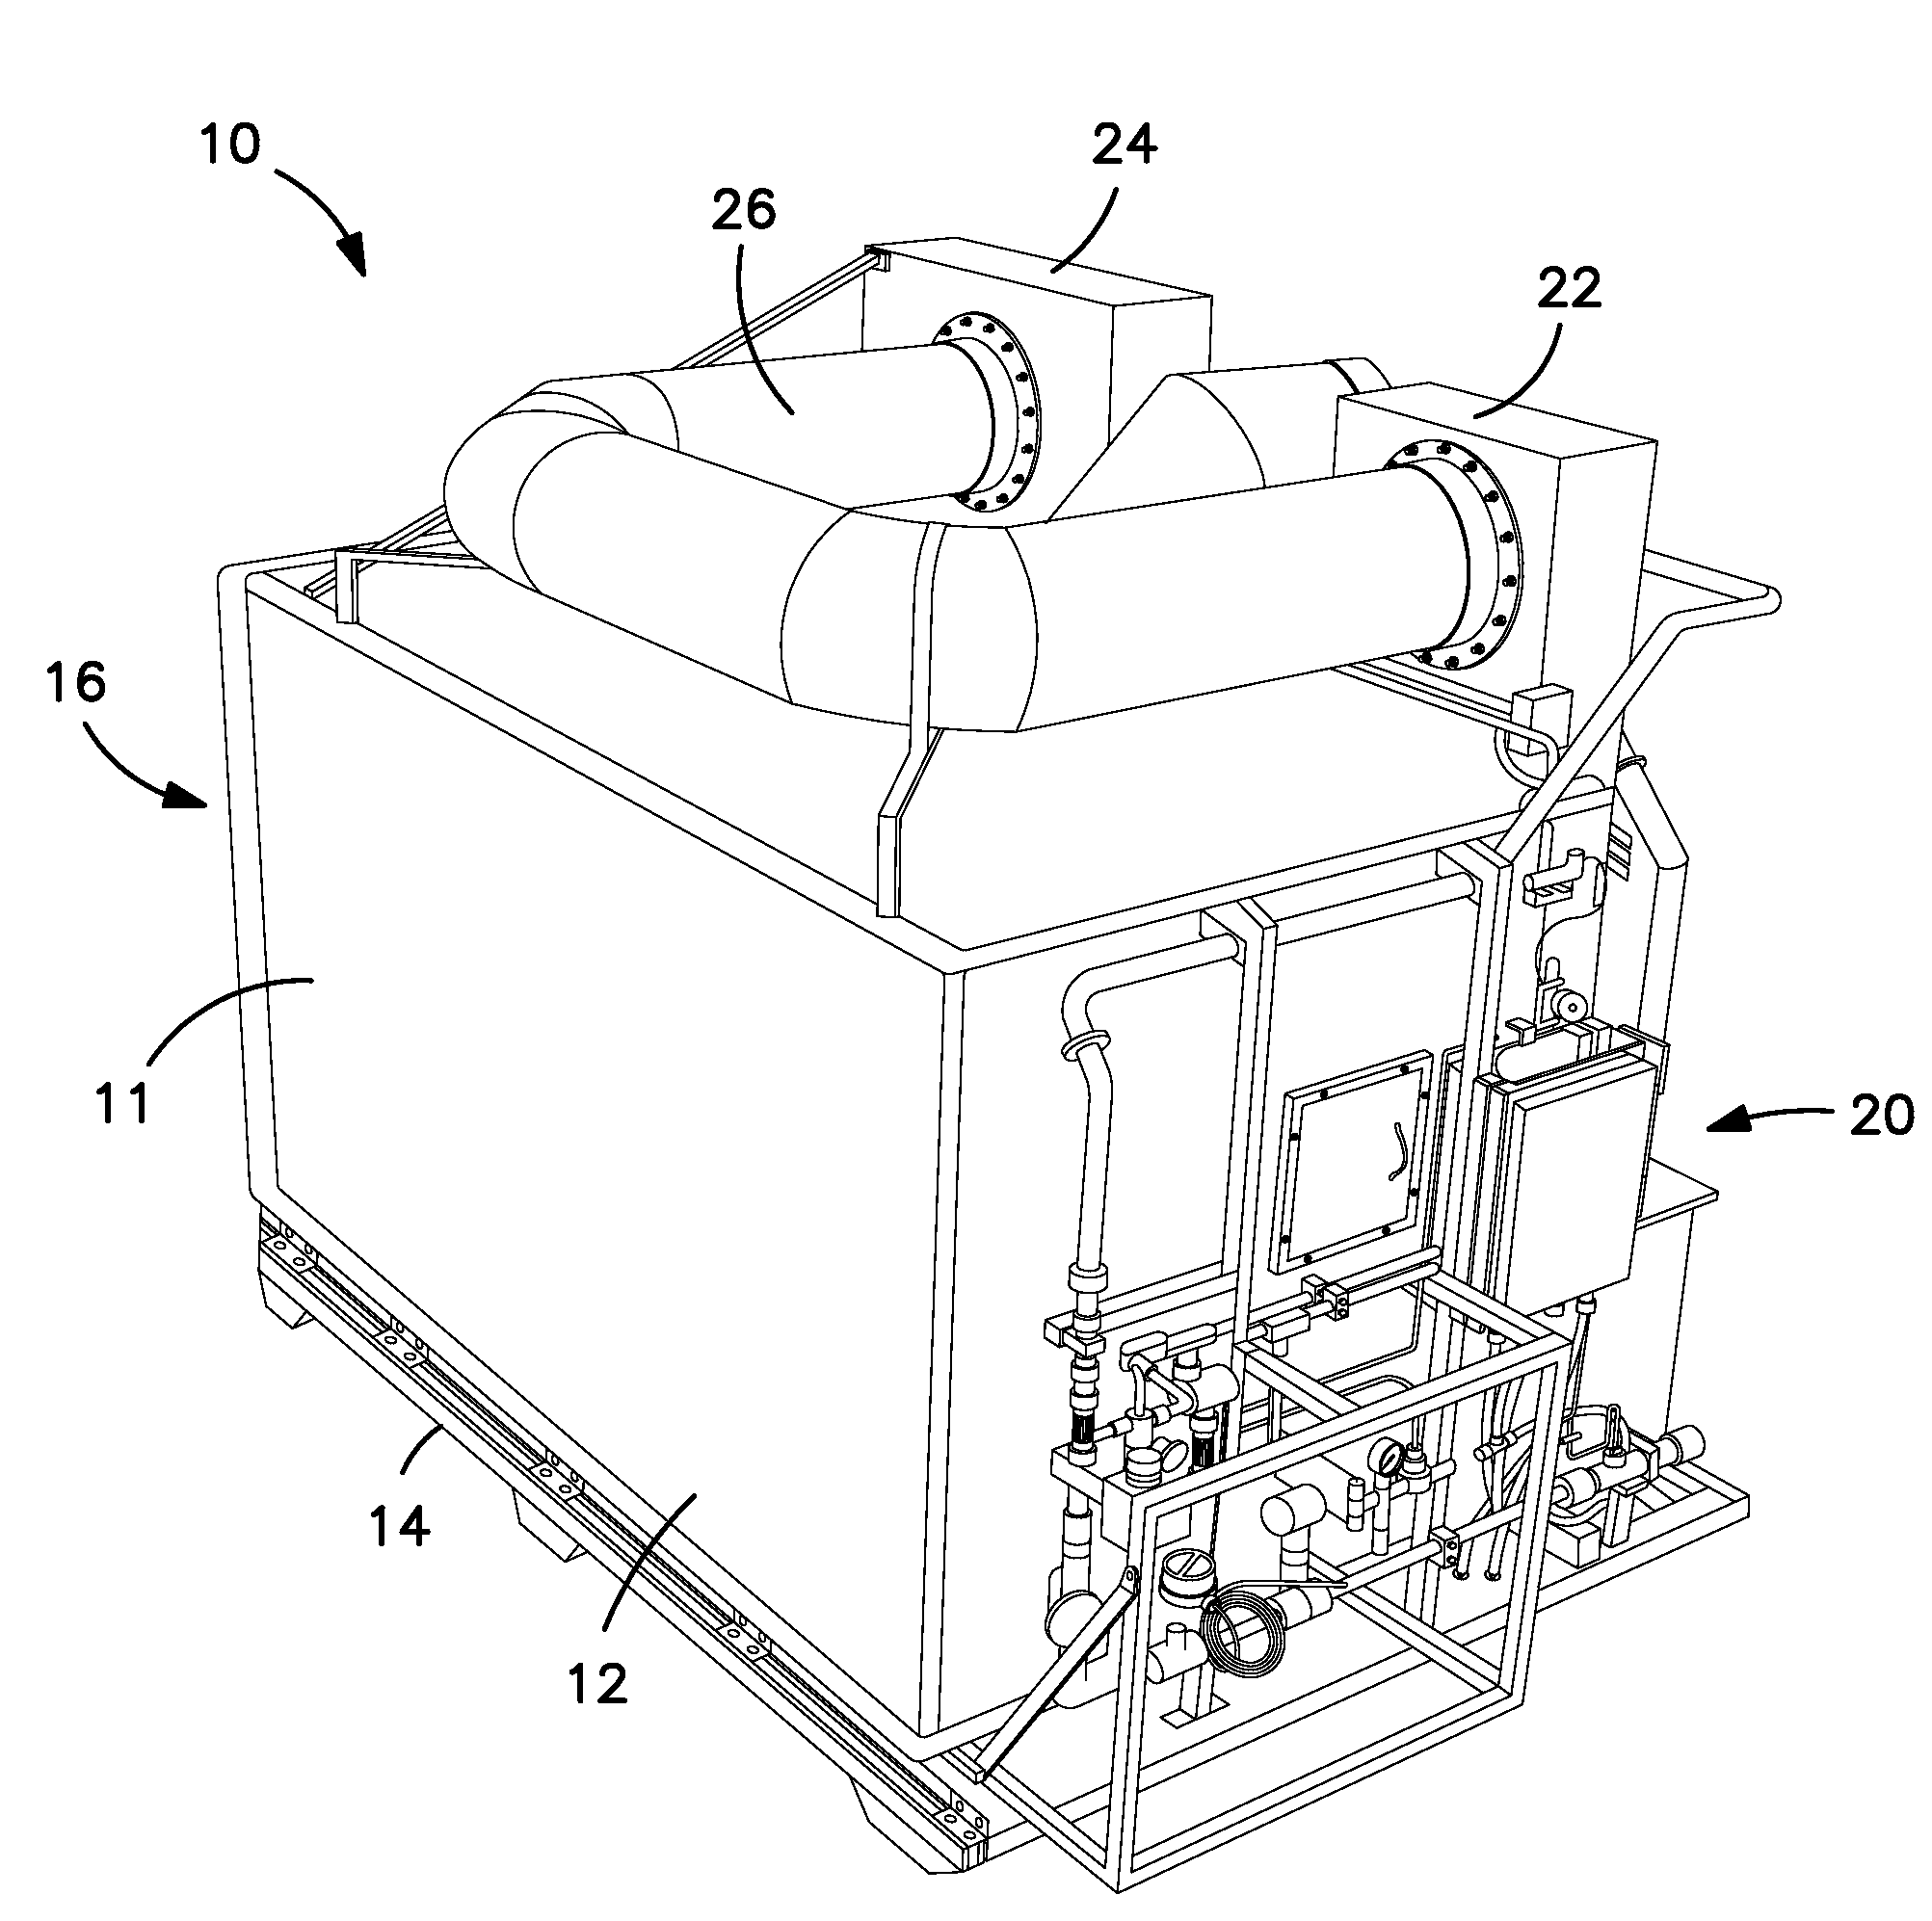 System and method for stunning poultry with gas